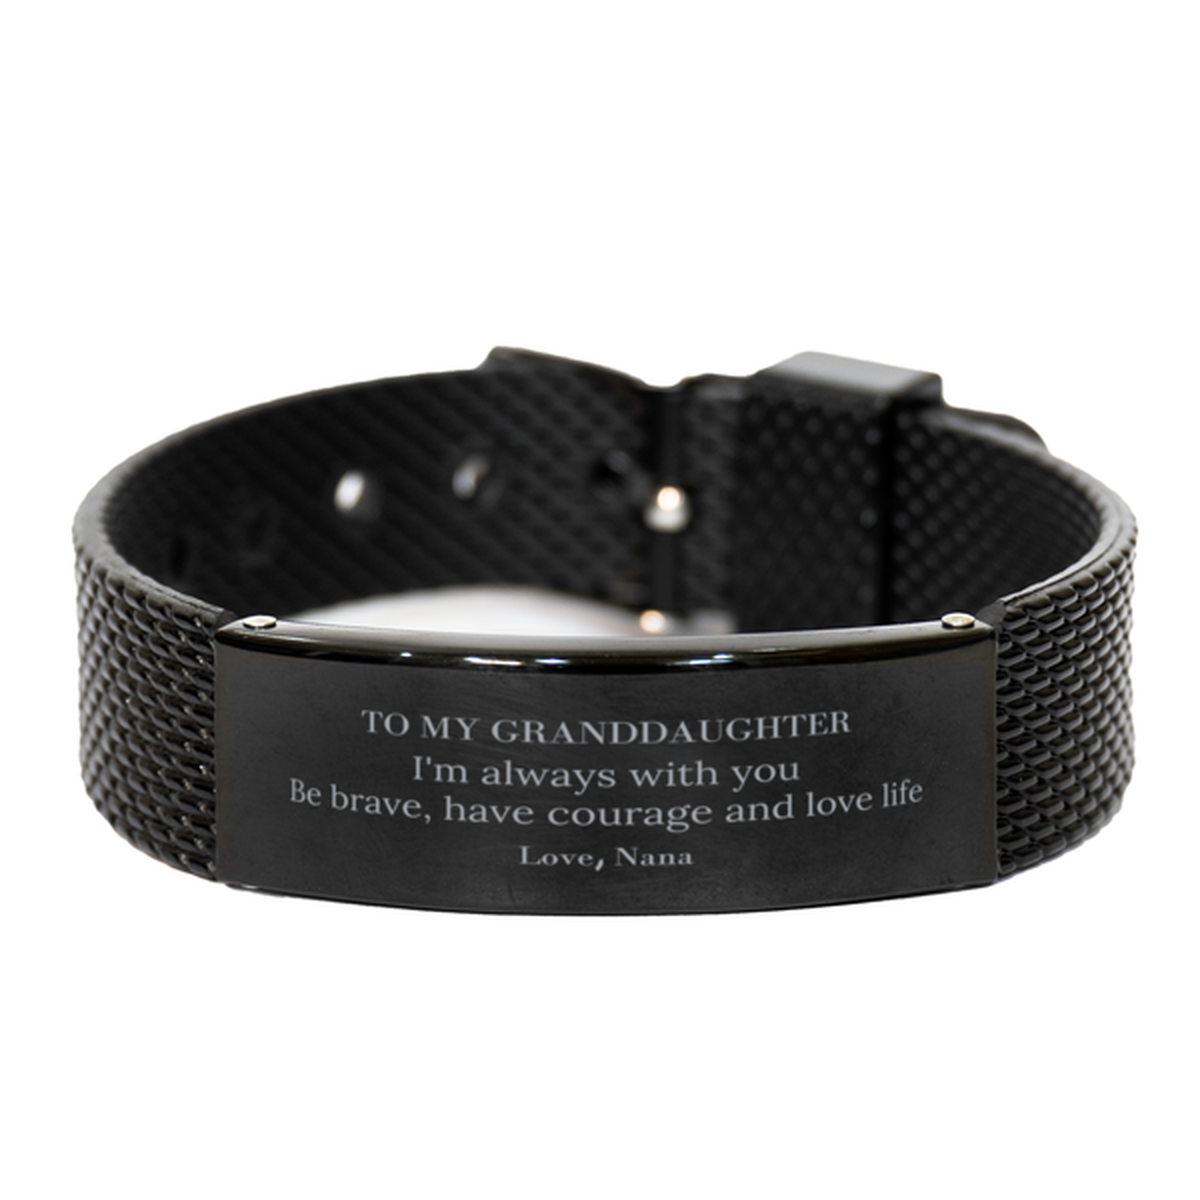 To My Granddaughter Gifts from Nana, Unique Black Shark Mesh Bracelet Inspirational Christmas Birthday Graduation Gifts for Granddaughter I'm always with you. Be brave, have courage and love life. Love, Nana